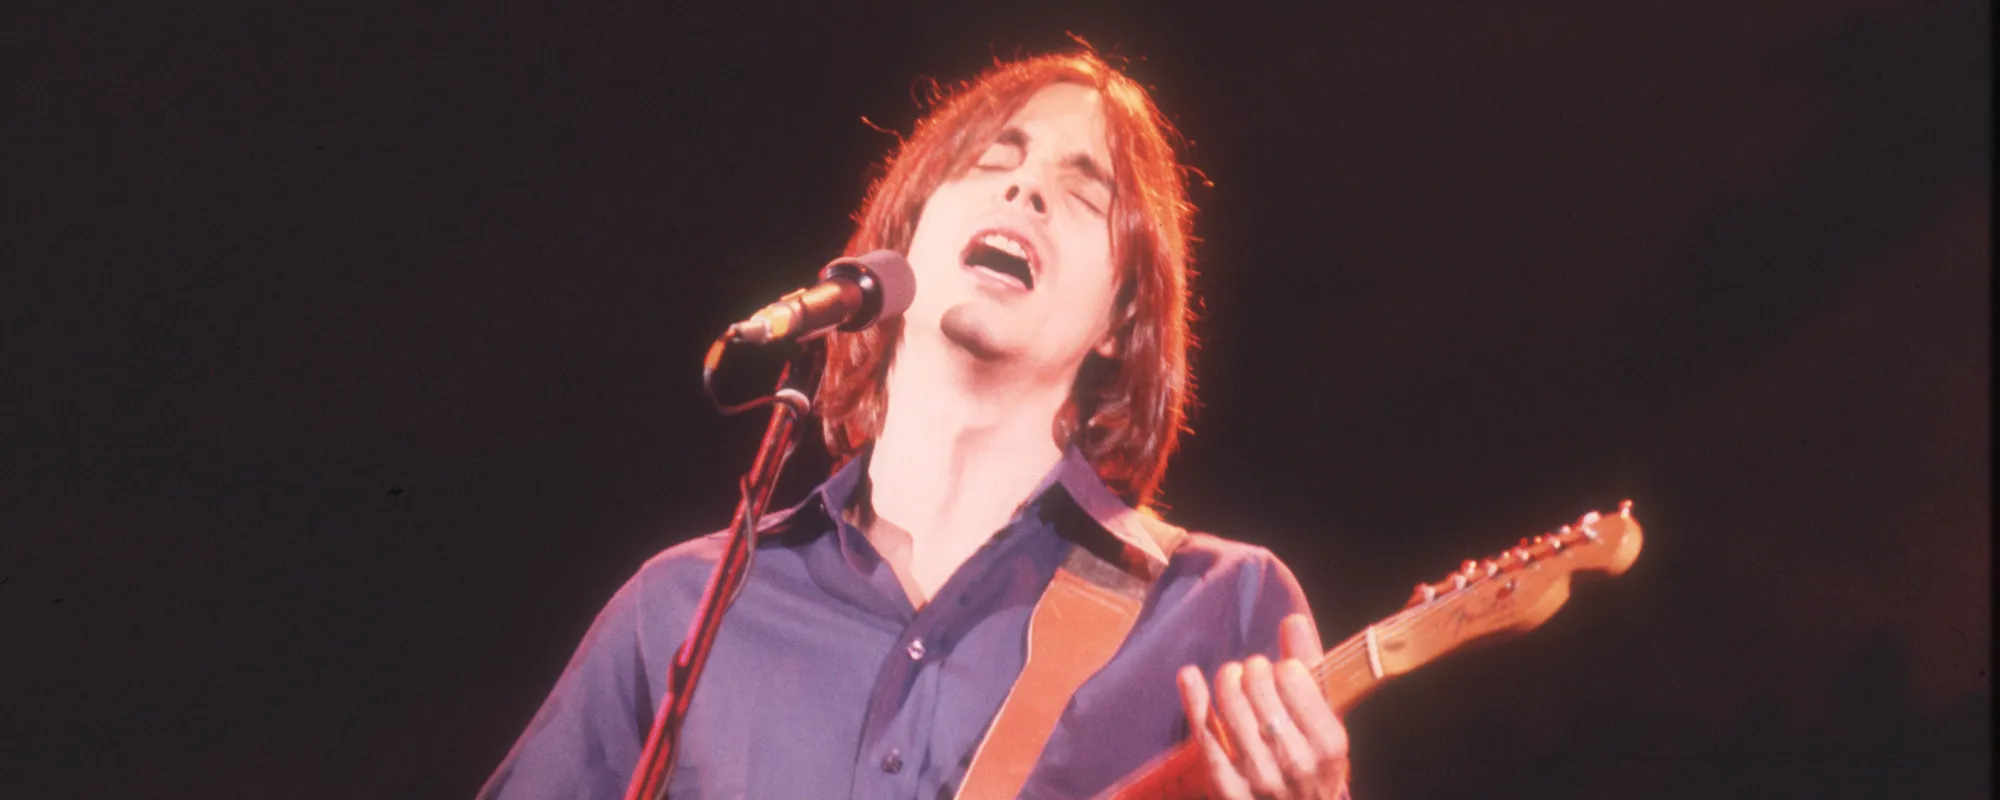 The Meaning Behind “Jamaica Say You Will” by Jackson Browne and How It Inadvertently Led to the Creation of a Record Label